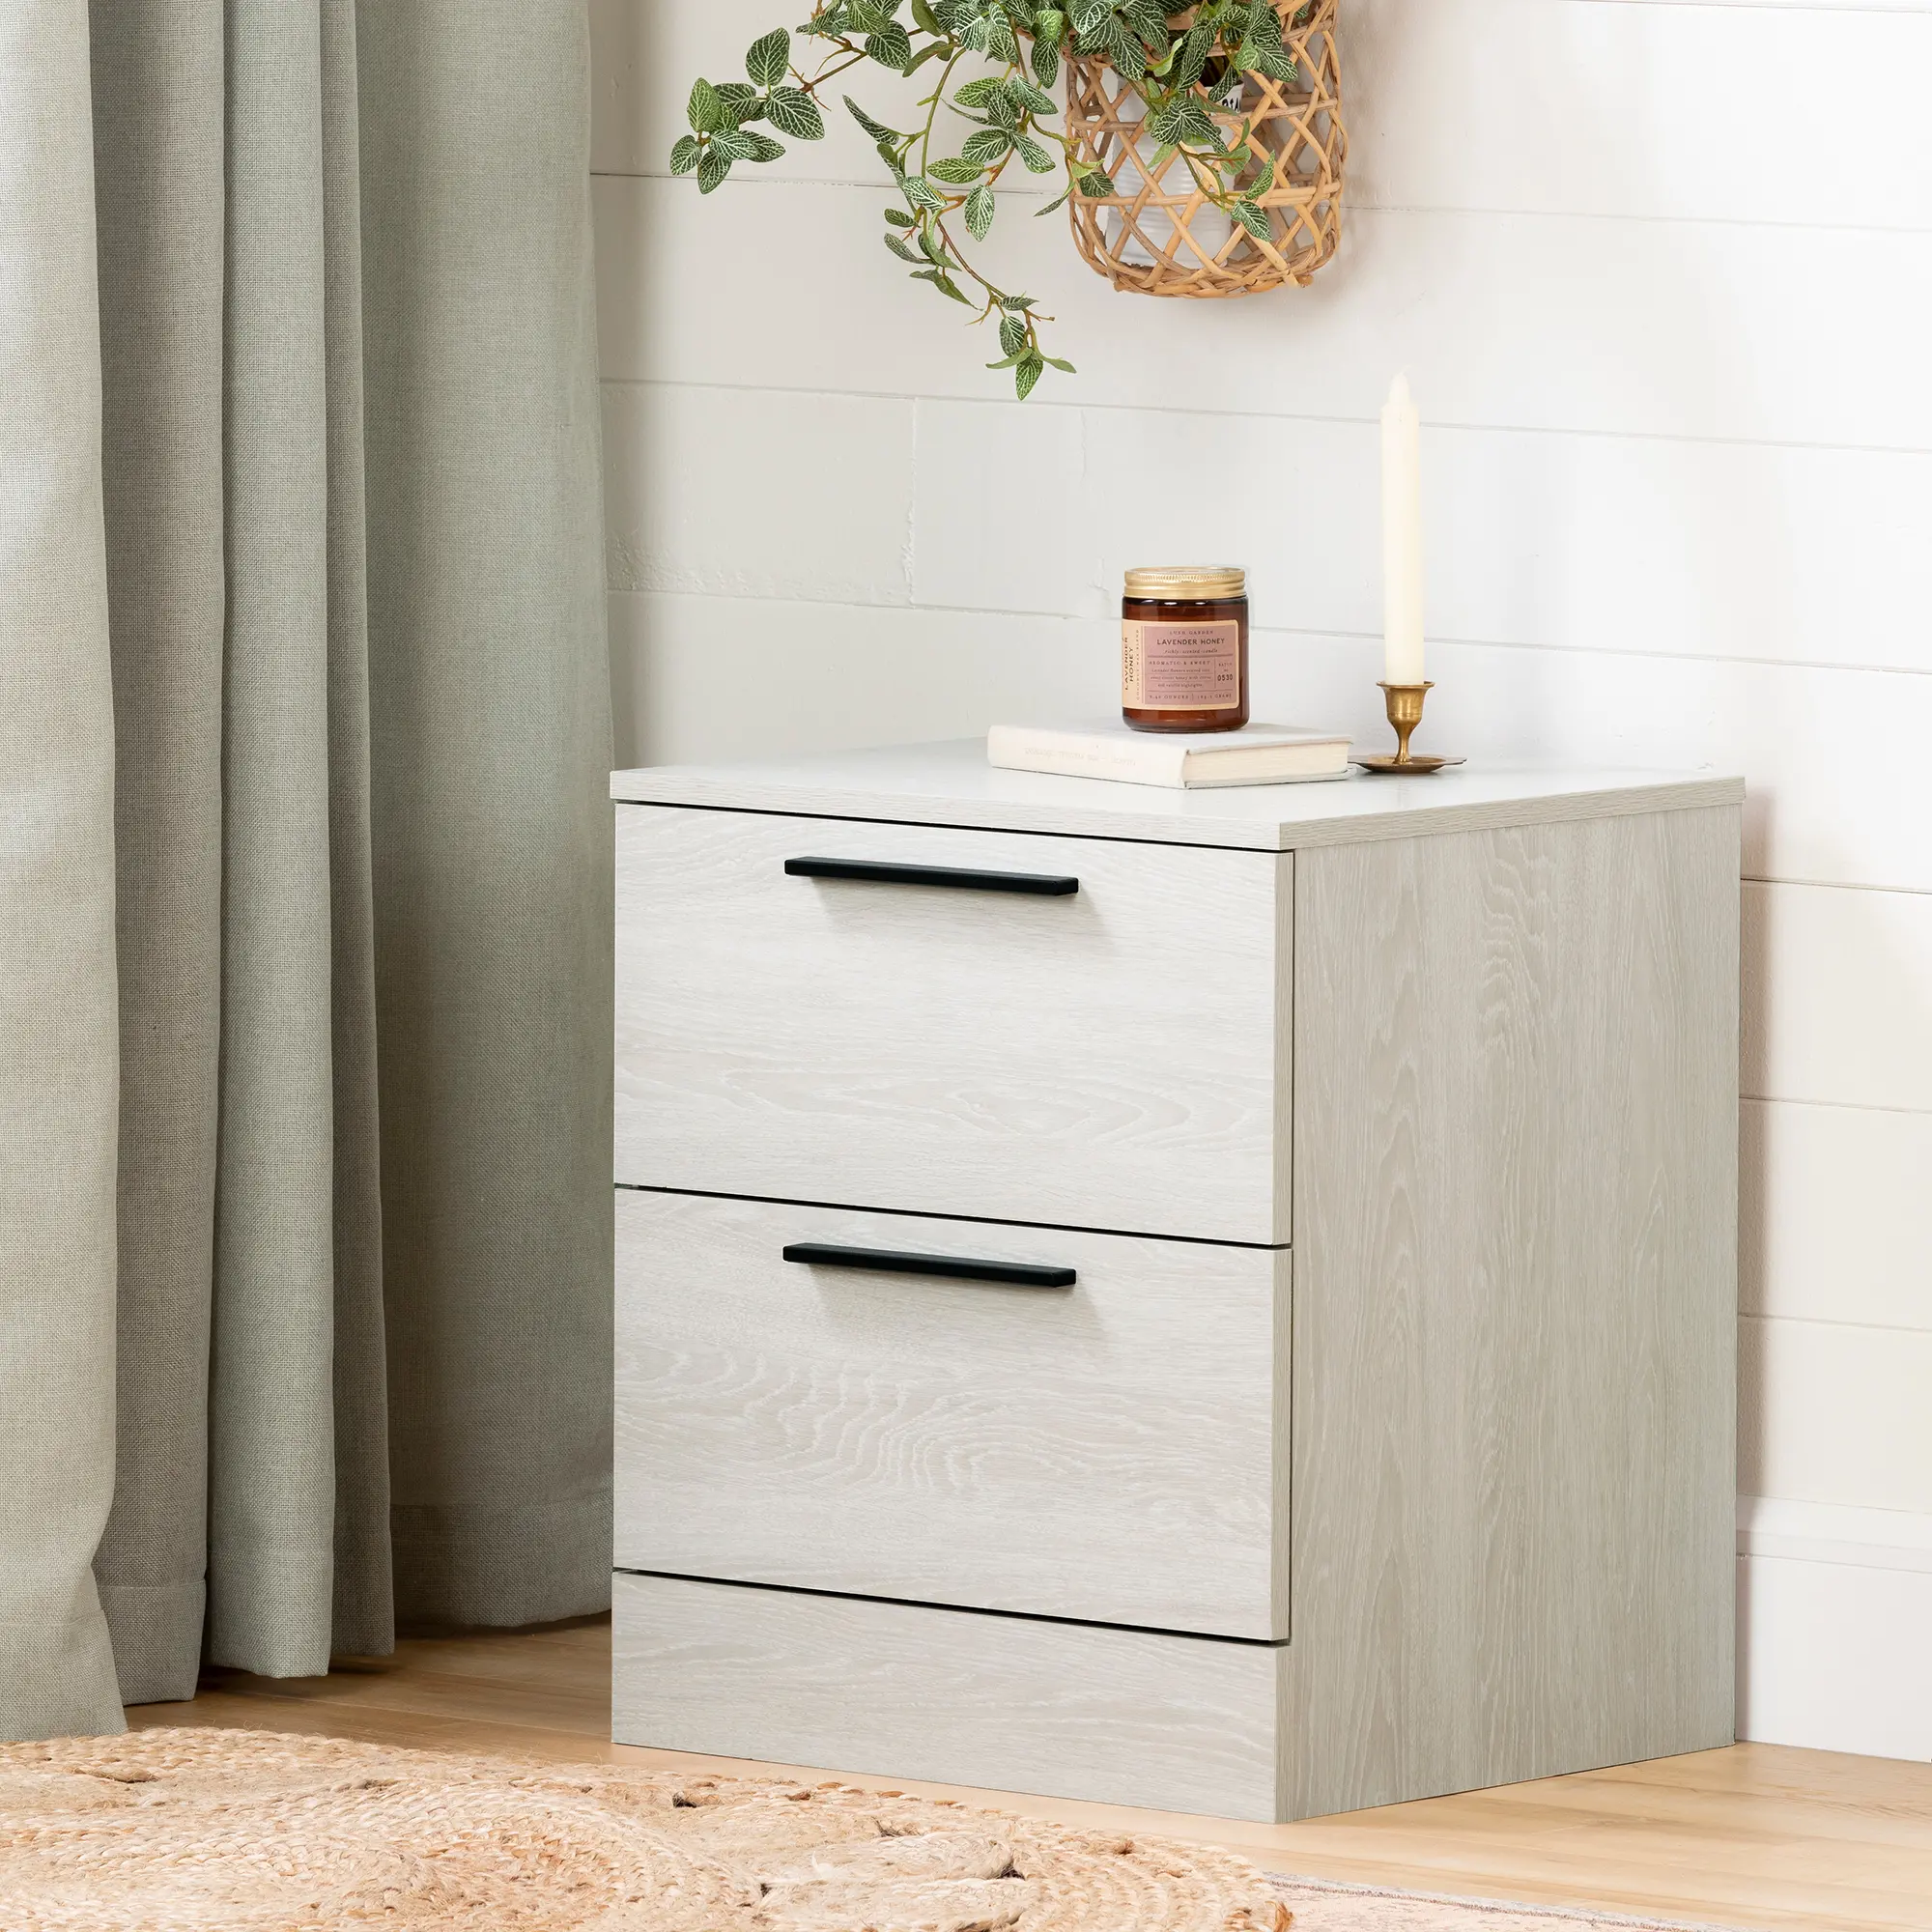 Winter Oak 2 Drawer Nightstand - Step One Essential - South Shore